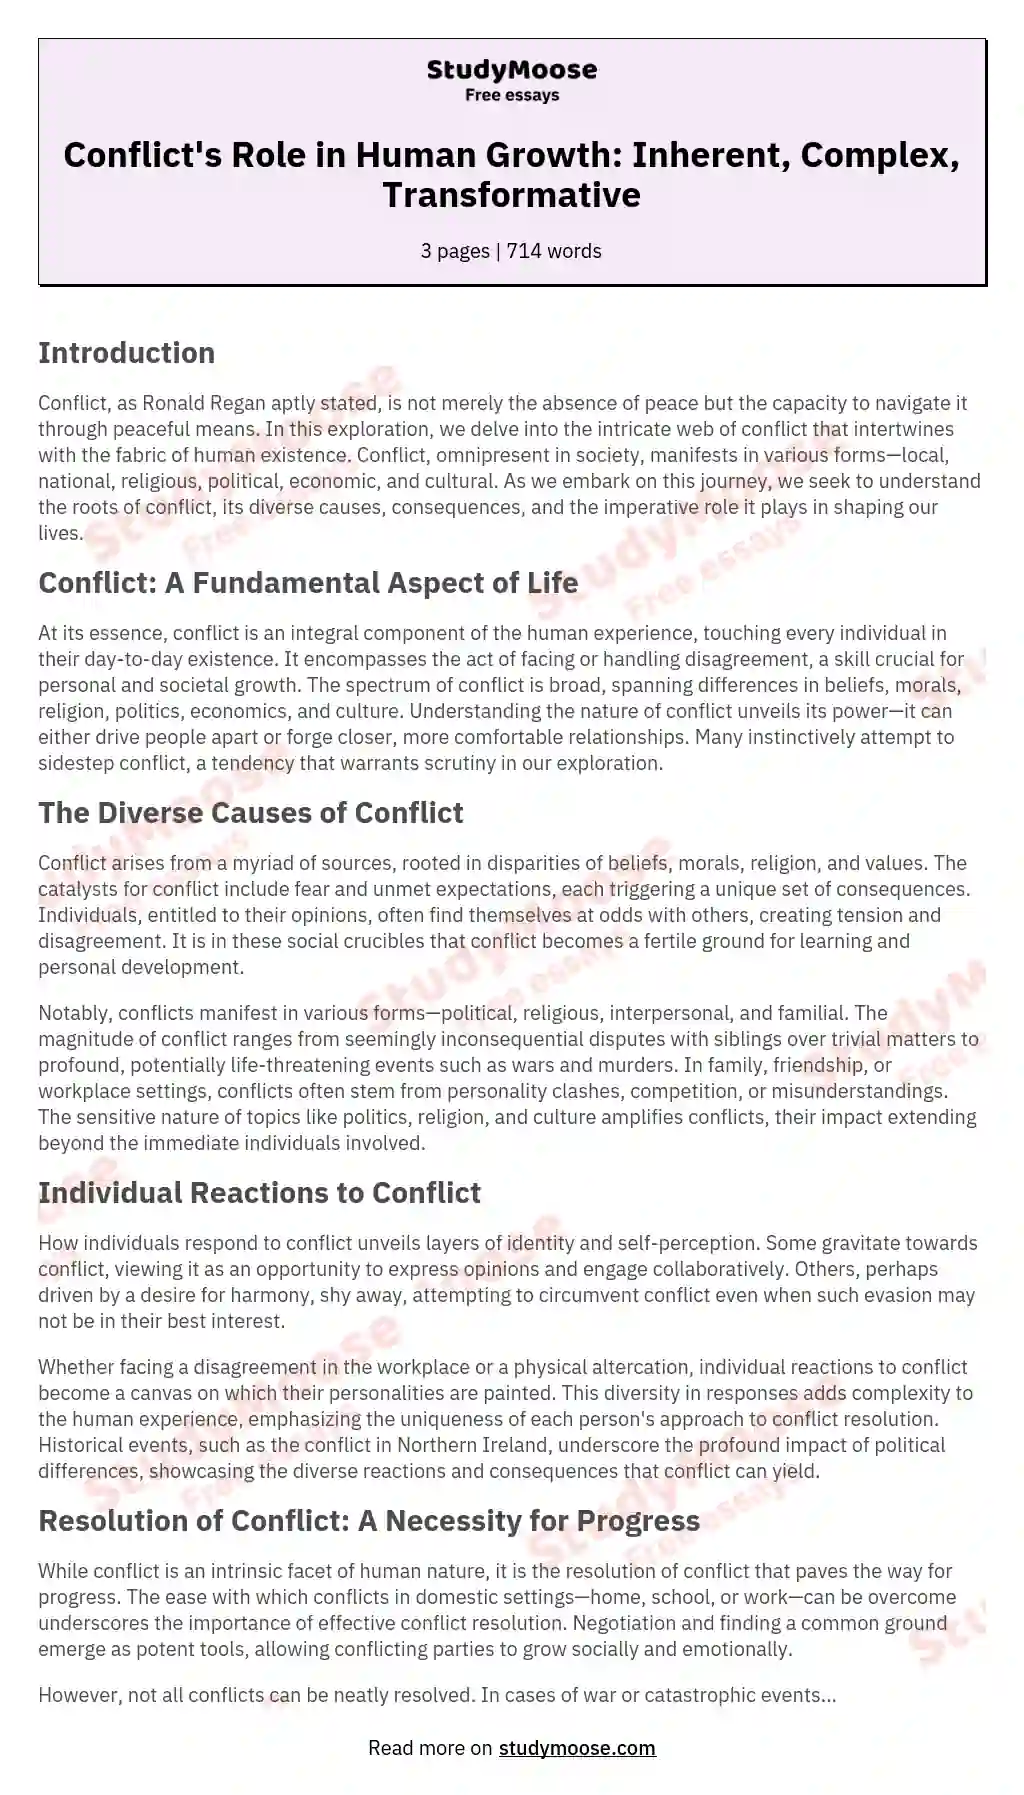 Conflict's Role in Human Growth: Inherent, Complex, Transformative essay